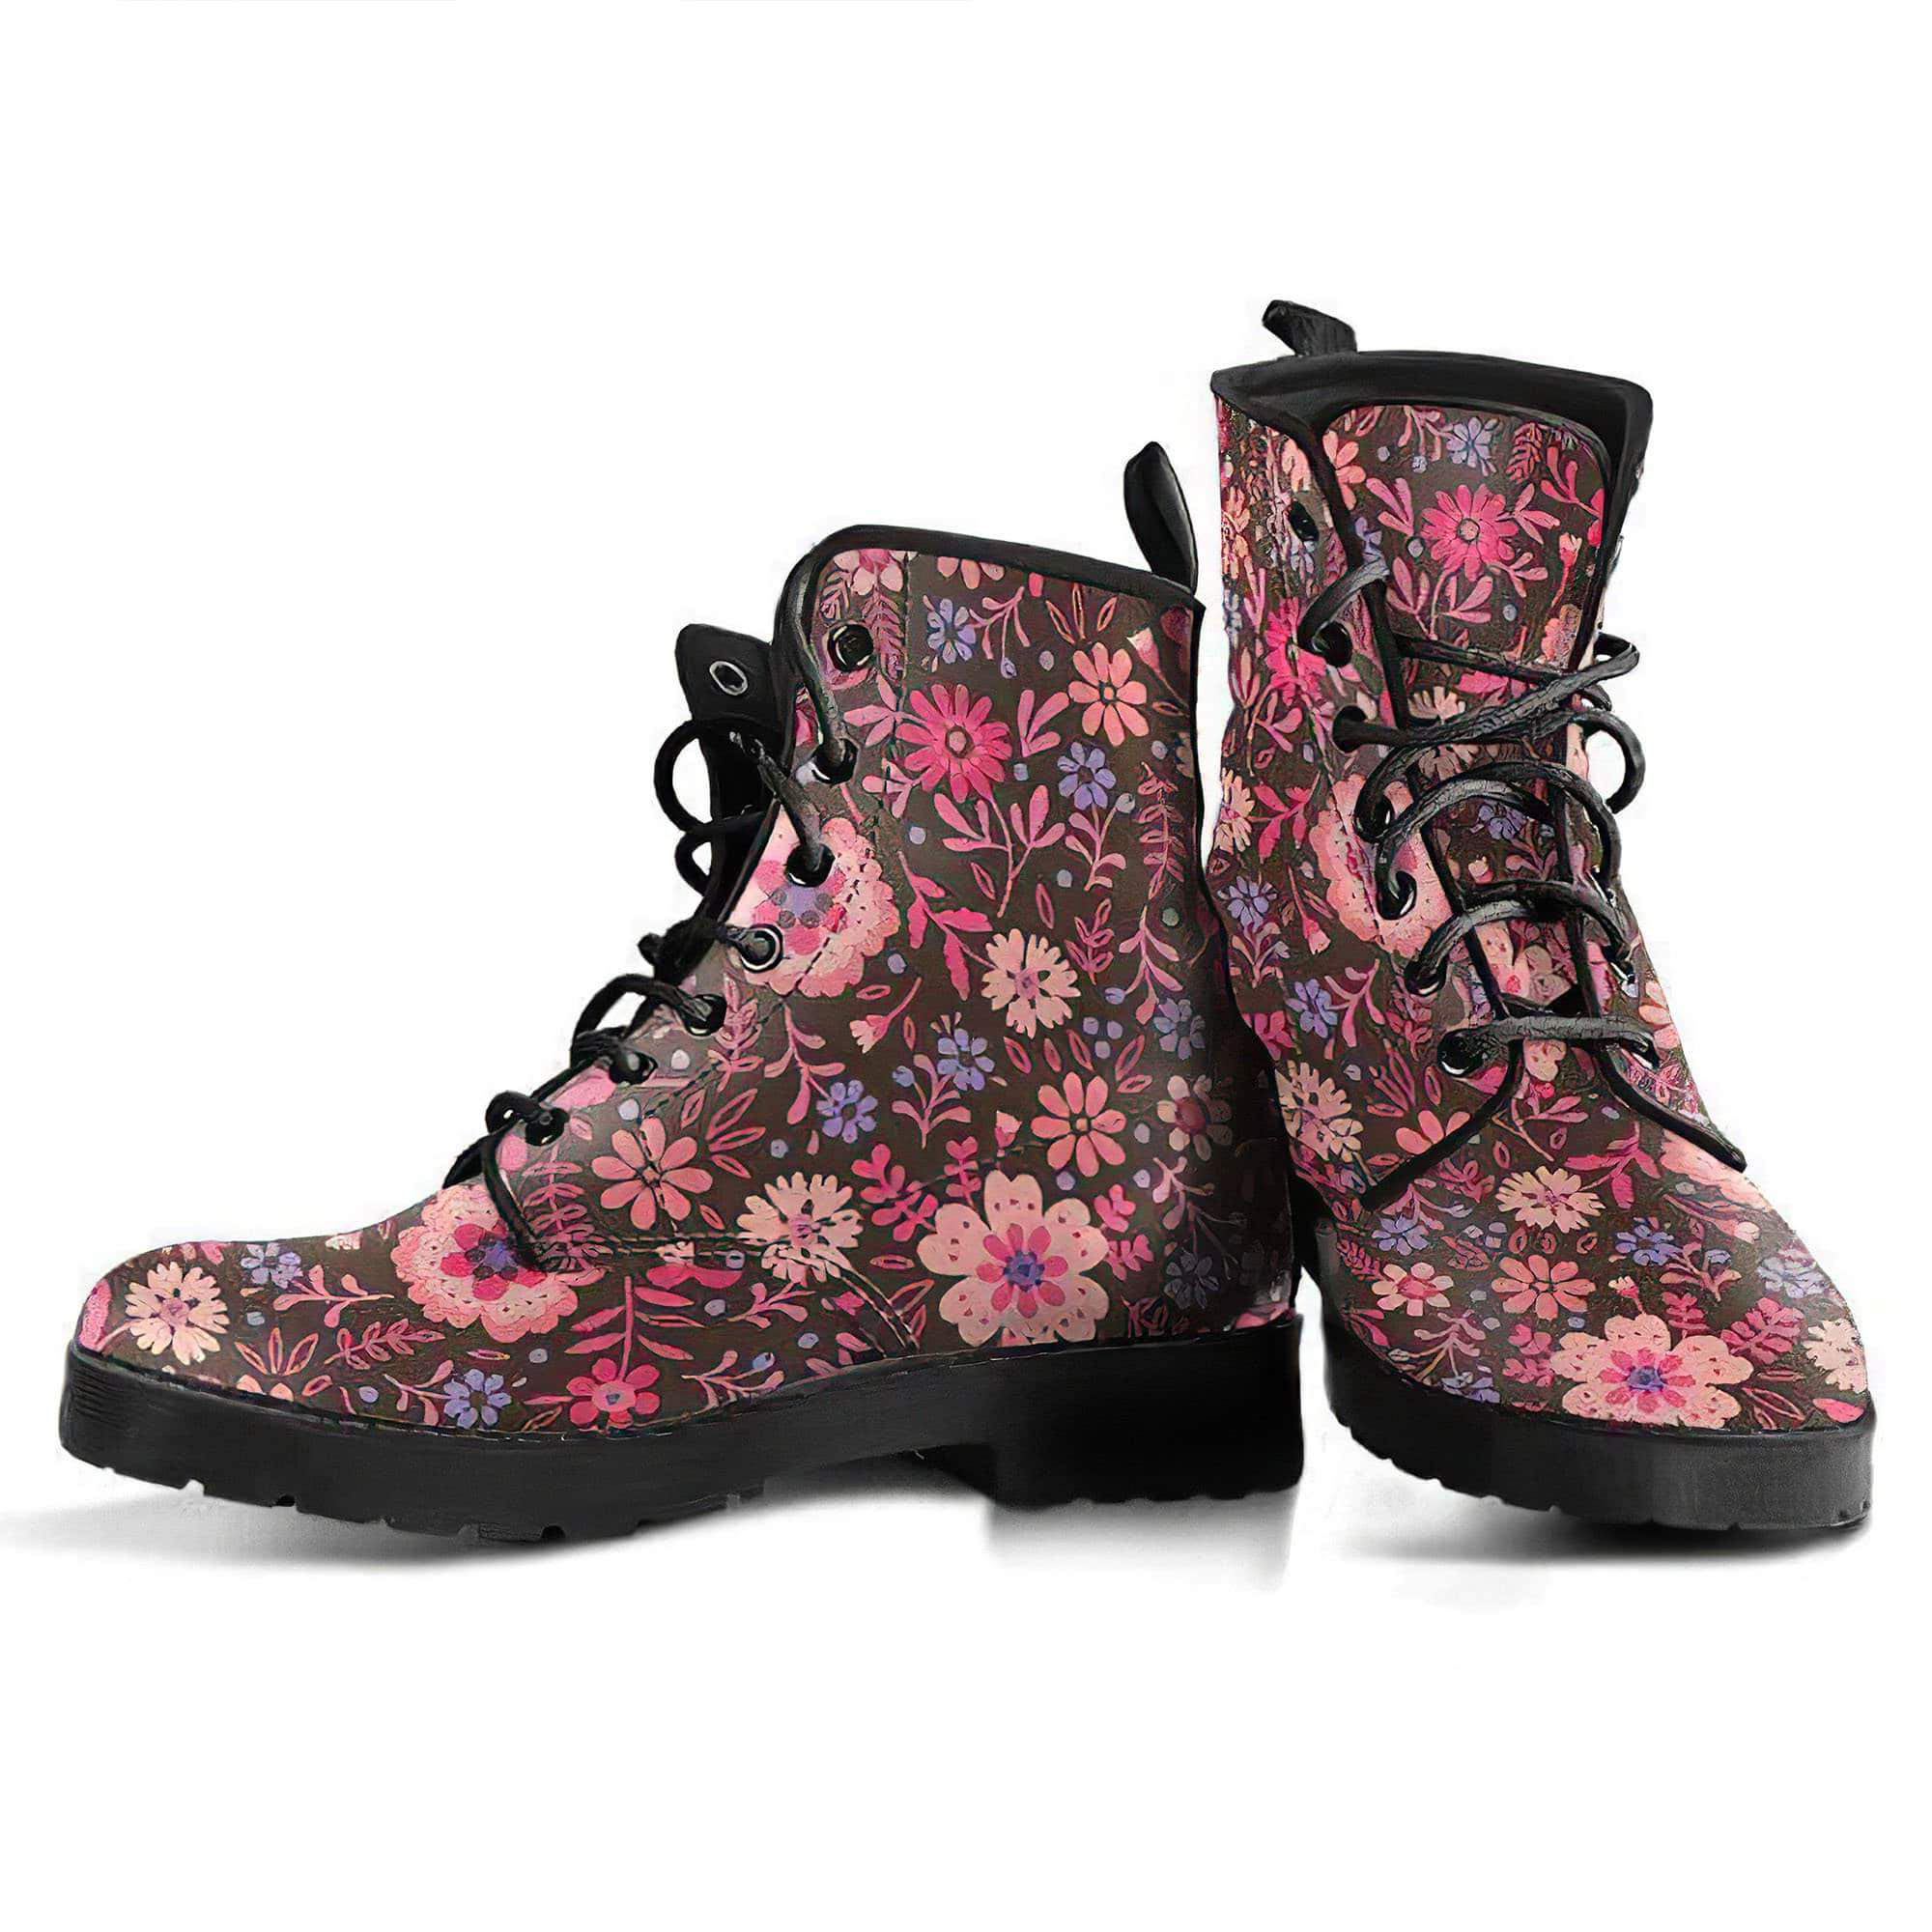 flower-pattern-handcrafted-boots-women-s-leather-boots-12051856097341.jpg